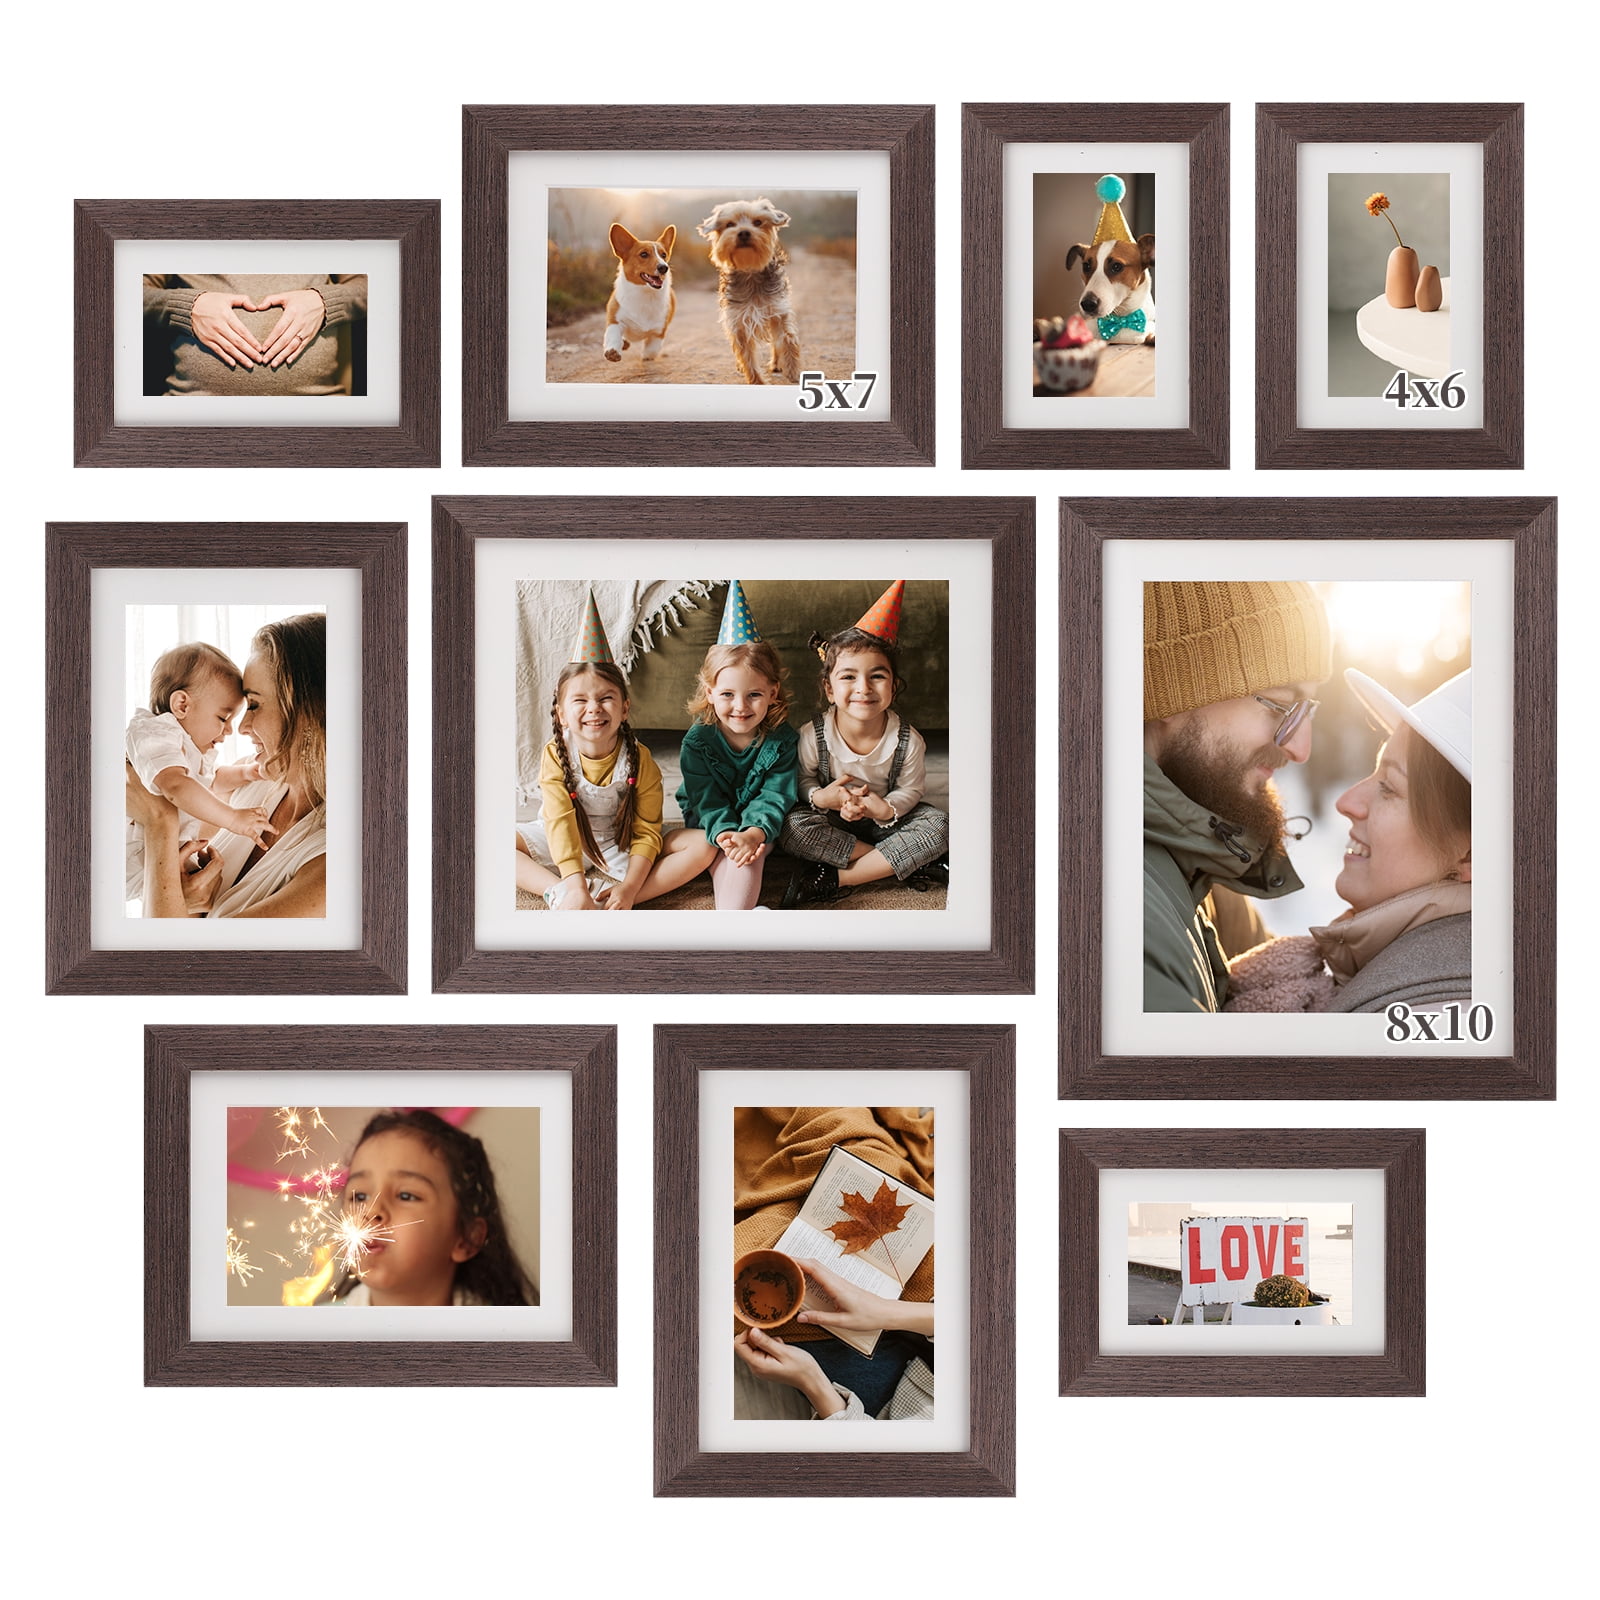 xnlkros Picture Frame Set 10 pack, Farmhouse Photo Frames, Gallery Wall  Frame Collage, 8x10 5x7 4x6 Frames in 3 Different Finishes Picture Frames  For